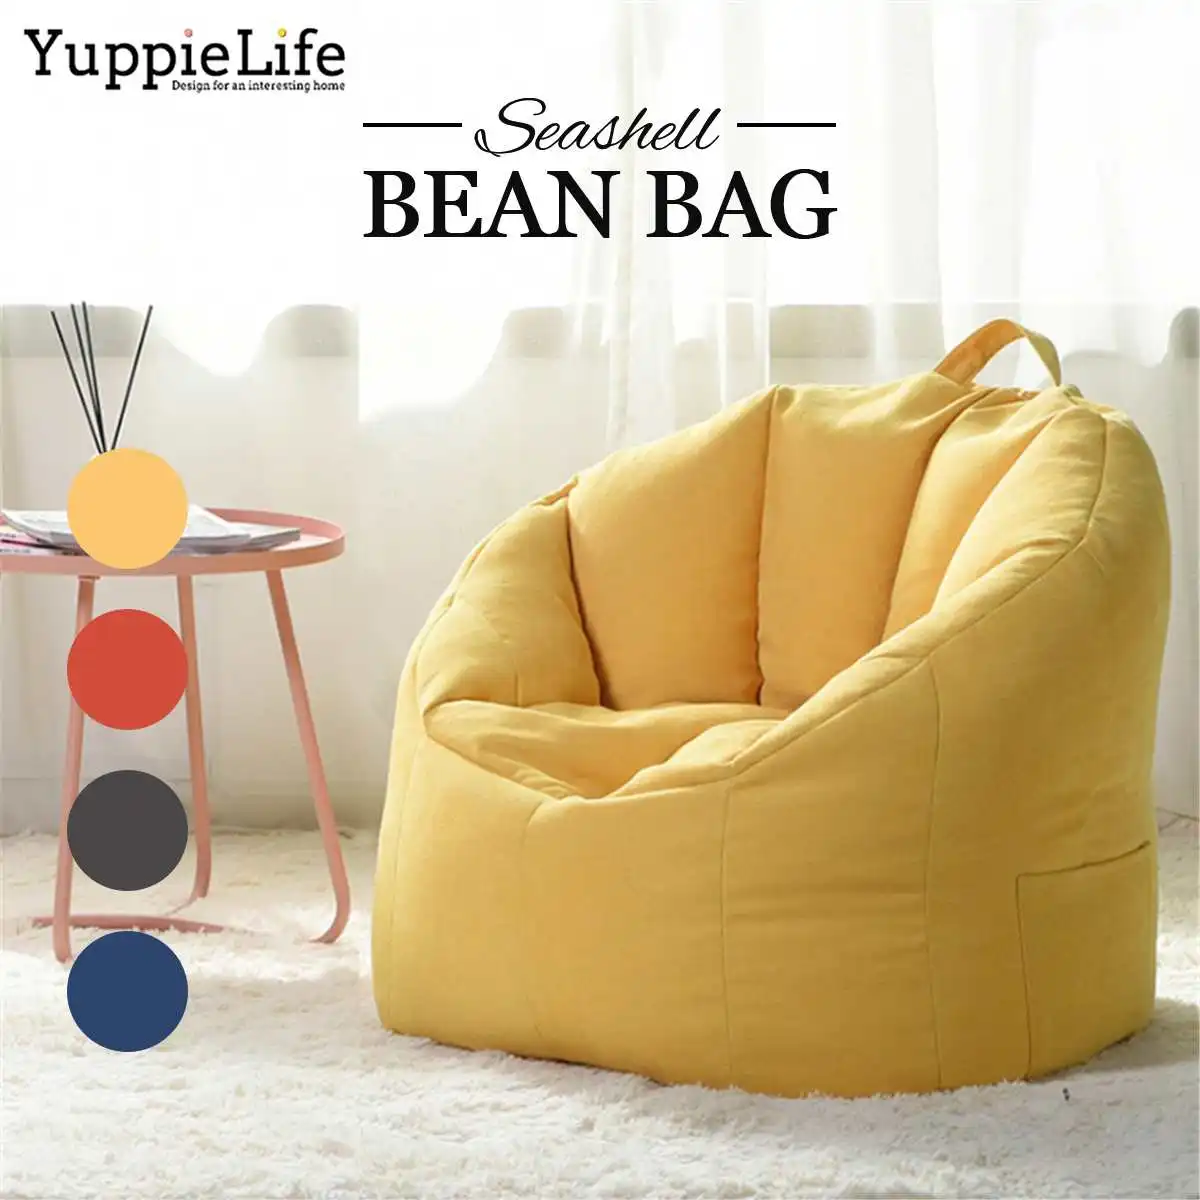 

Large Lazy Bean Bag Sofas Cover Seat Multiple Colors Tatami Puff Relax Lounge Furniture Living Room Chair Comfort Covers